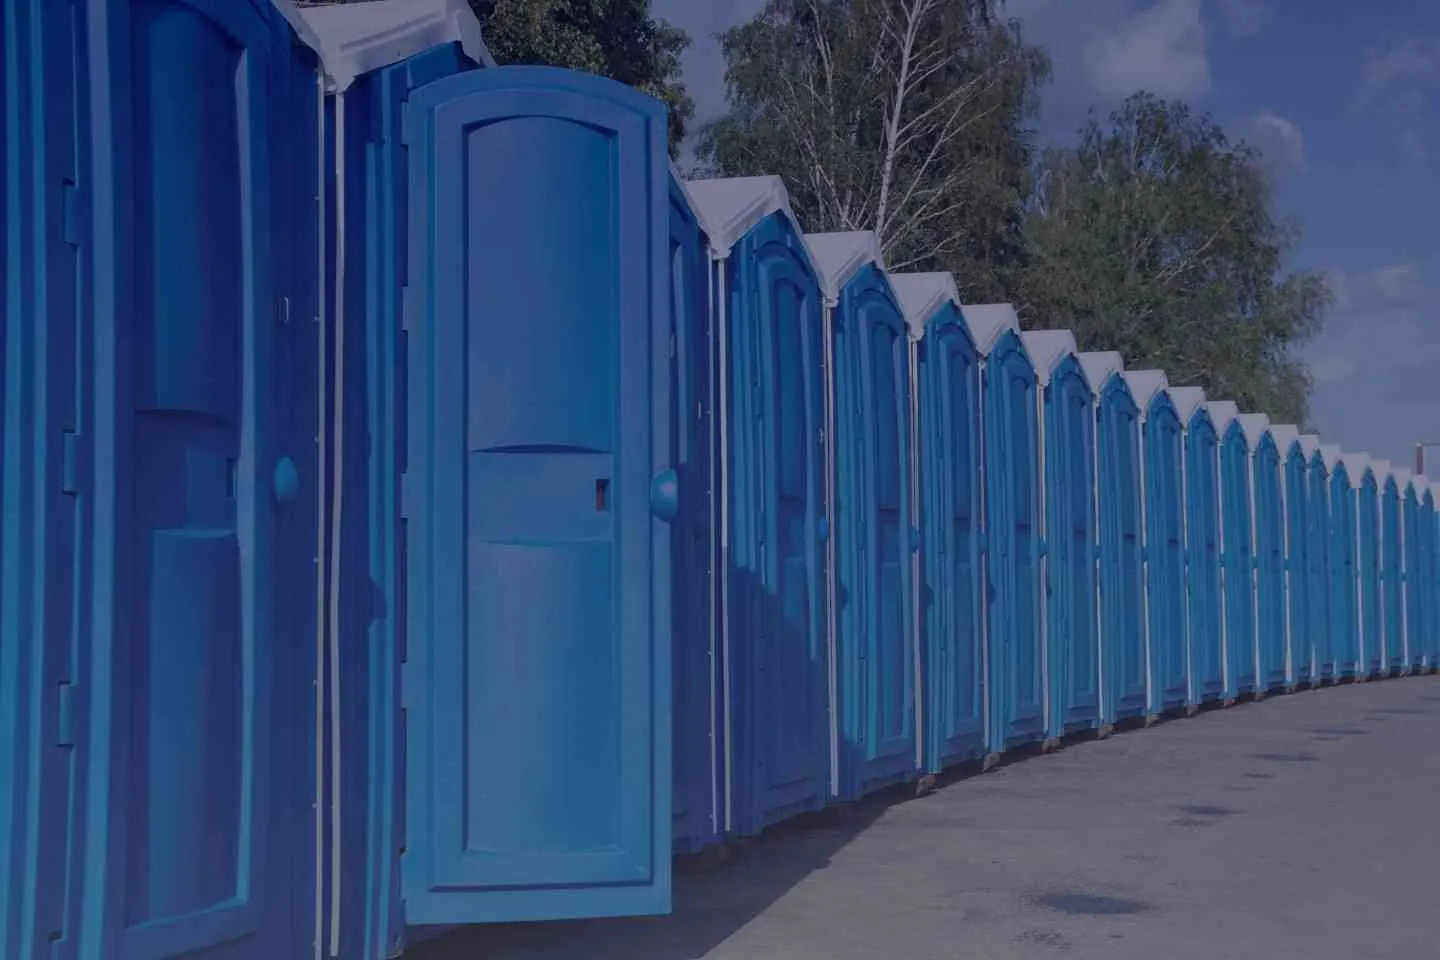 blue portable toilets lined up along a road